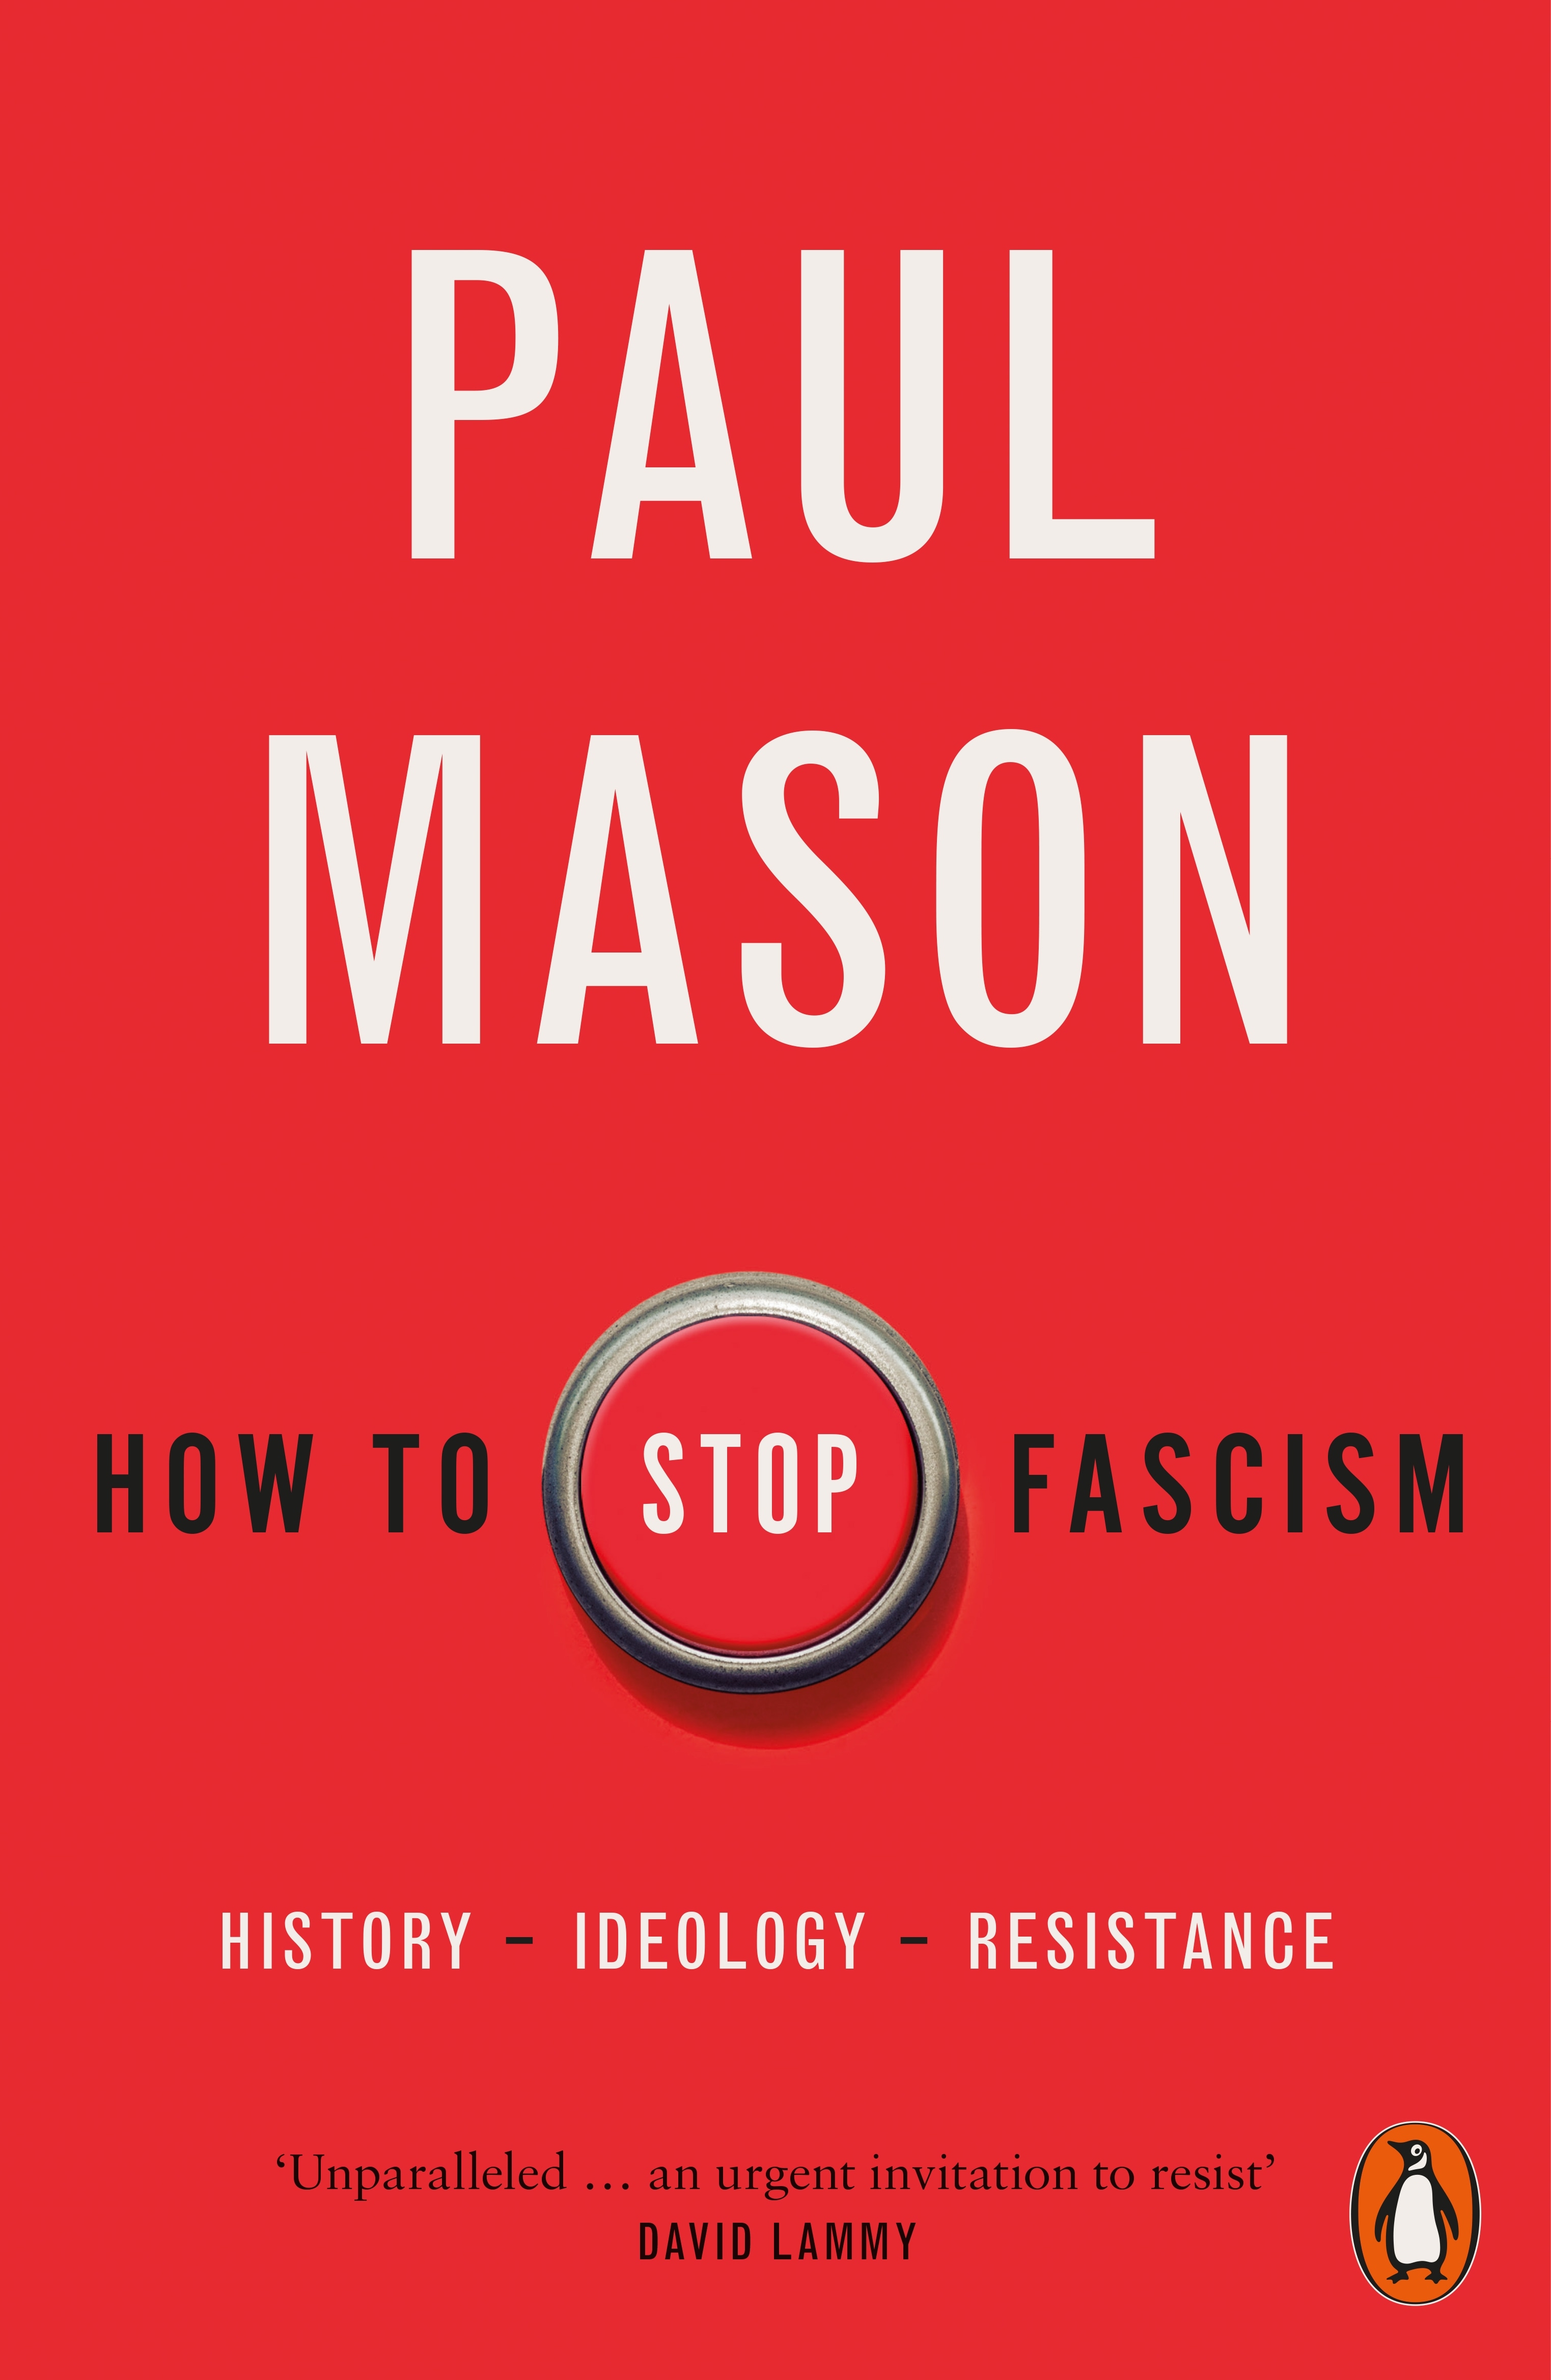 Book “How to Stop Fascism” by Paul Mason — August 4, 2022